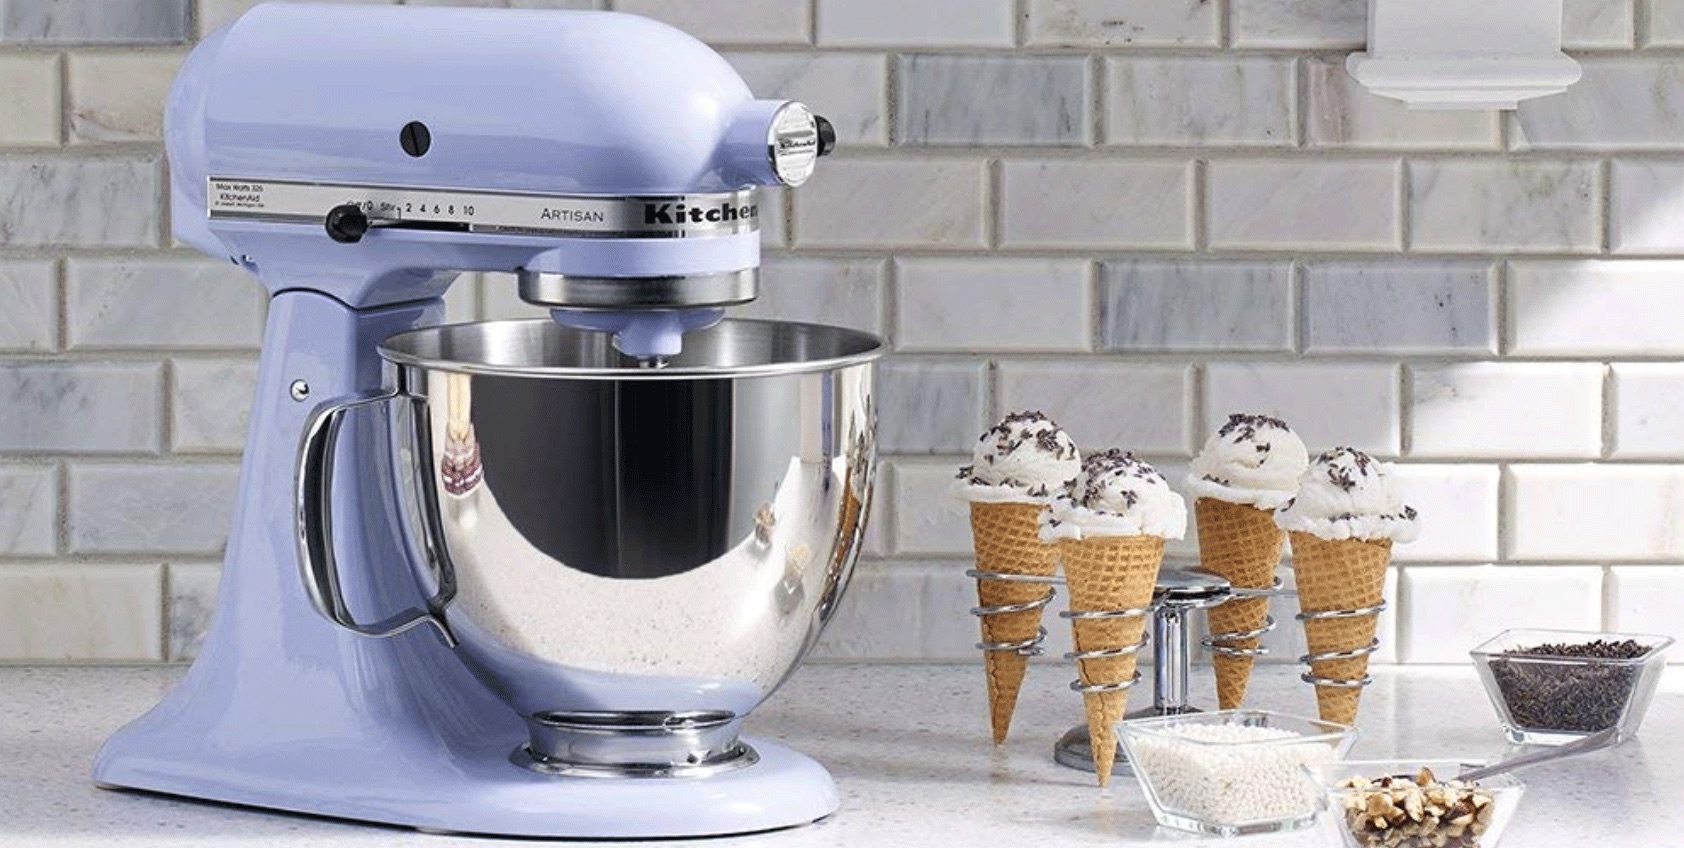 https://storables.com/wp-content/uploads/2023/07/how-to-know-which-kitchenaid-mixer-i-have-1689924480.jpeg